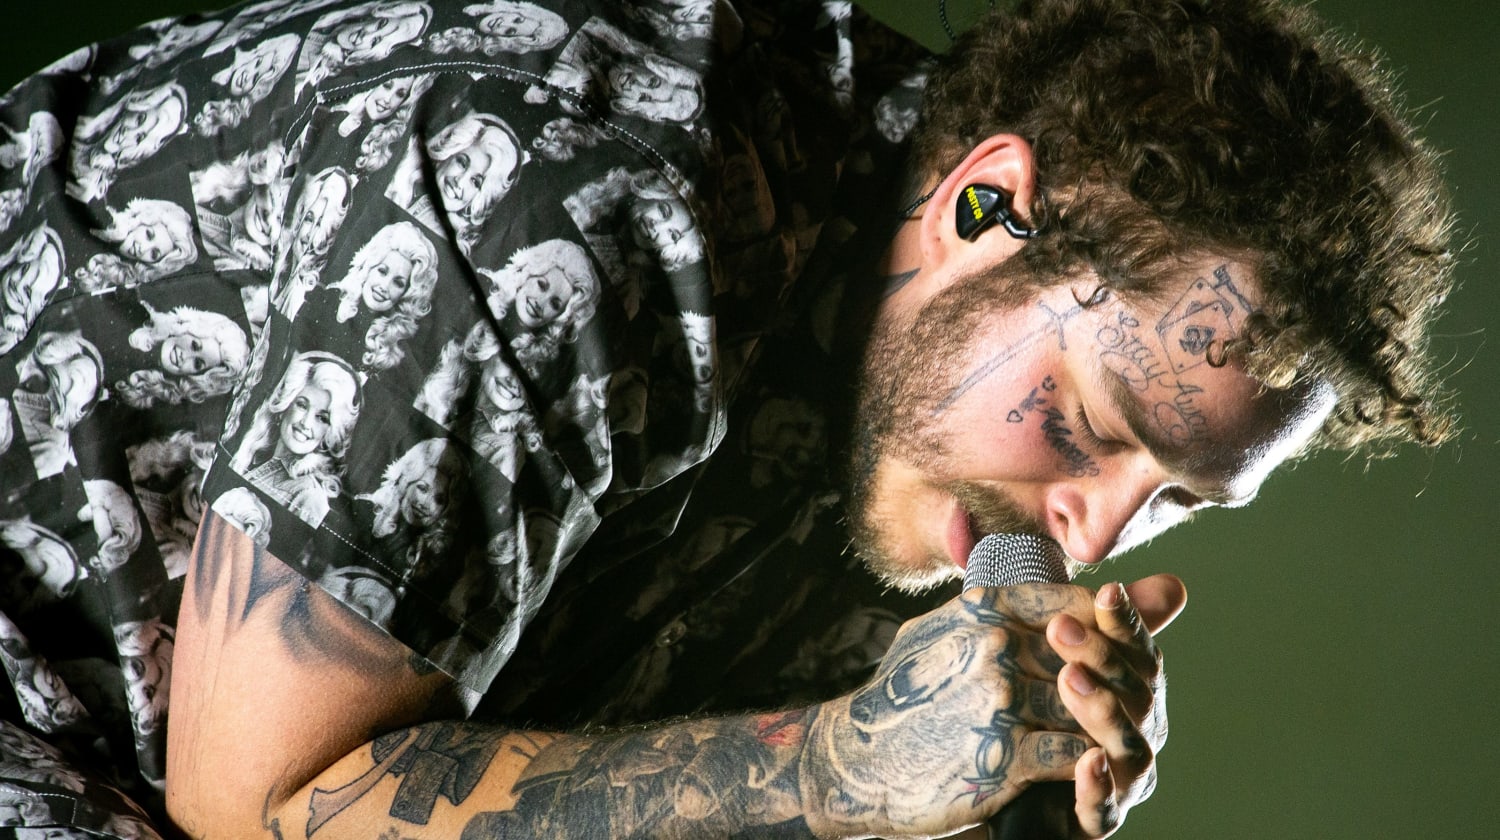 Post Malone wore a Dolly Parton outfit during his Bonnaroo set, and Dolly Parton loved it